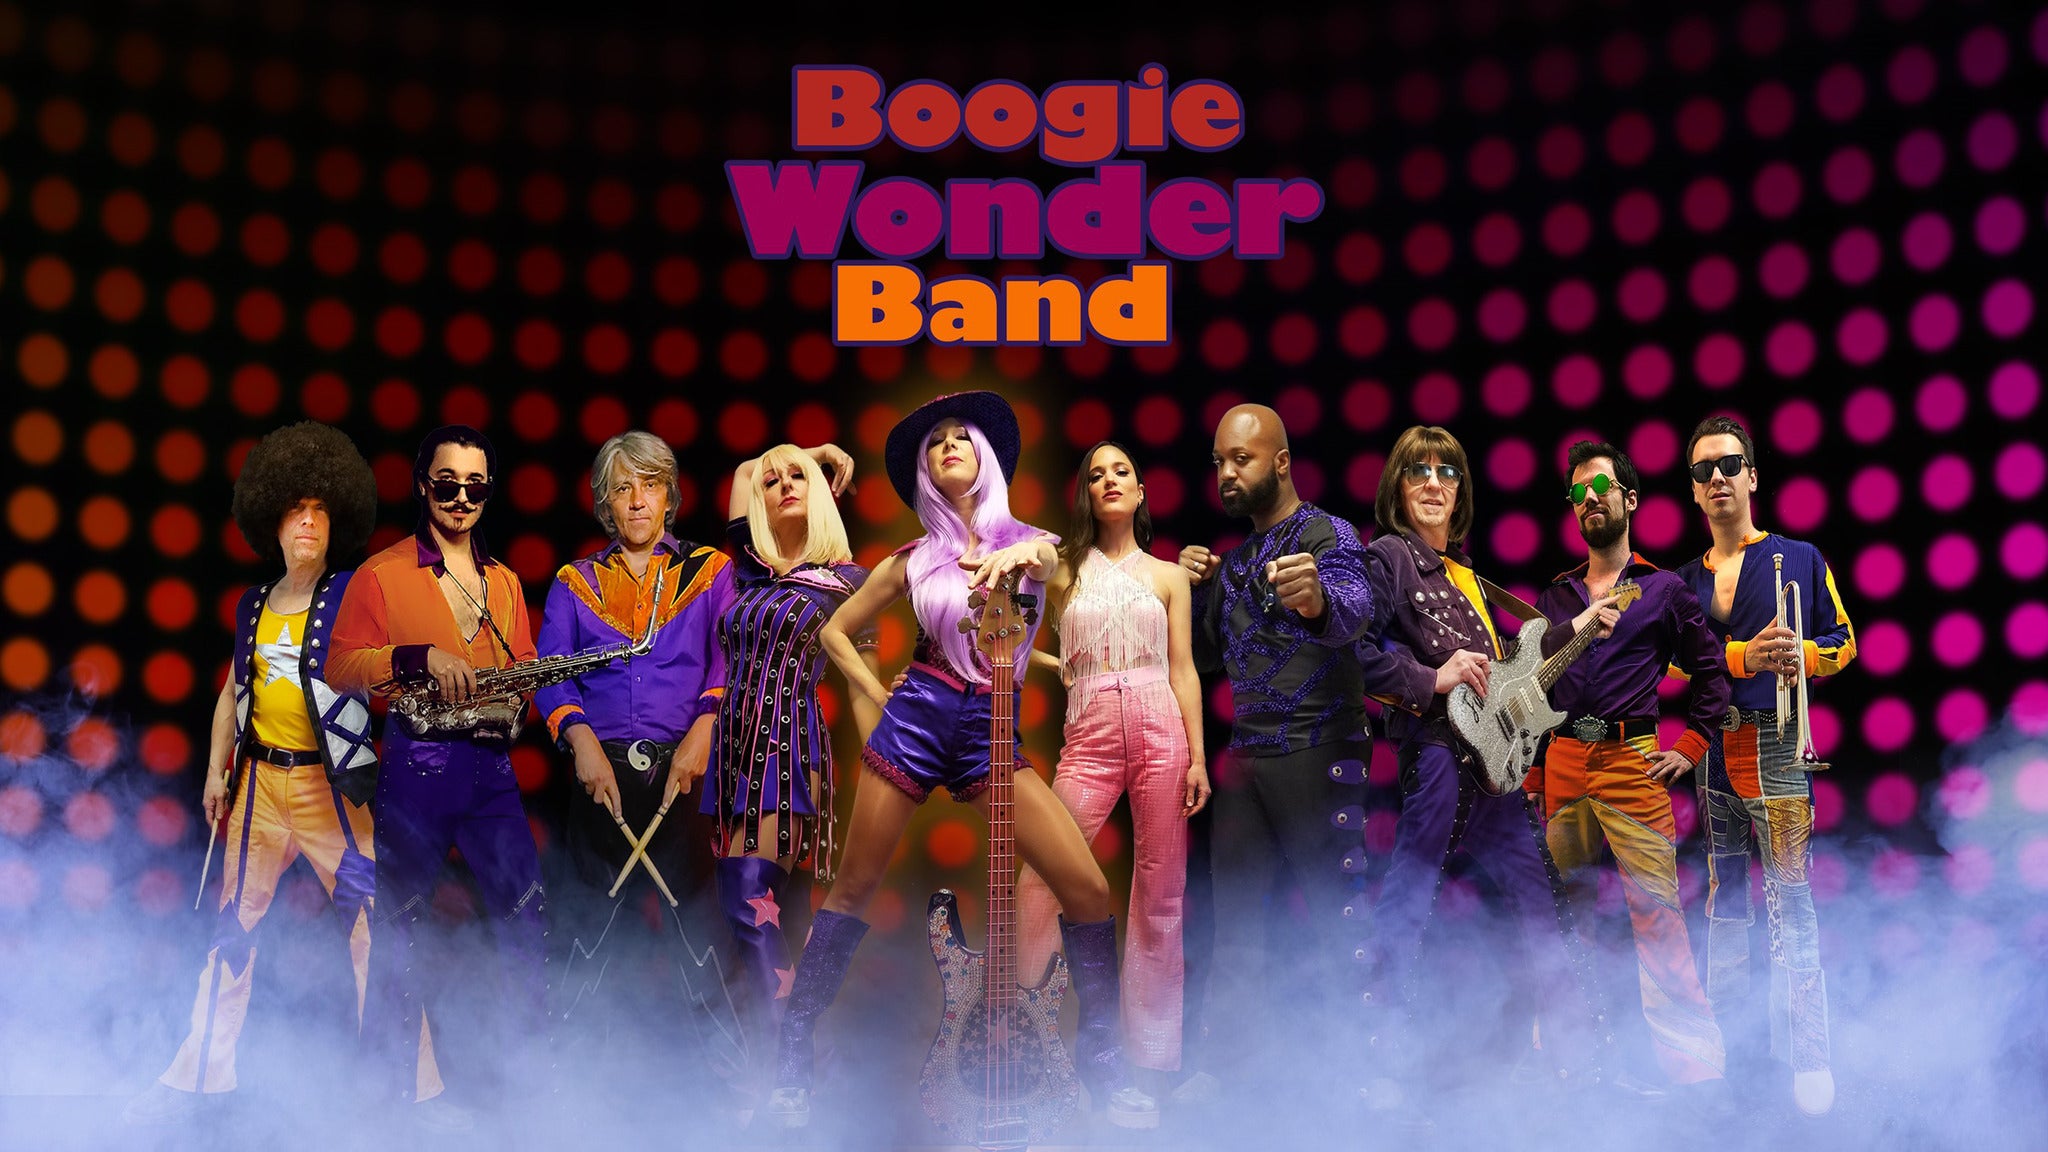 Boogie Wonder Band in Montreal promo photo for 7 jours avant presale offer code